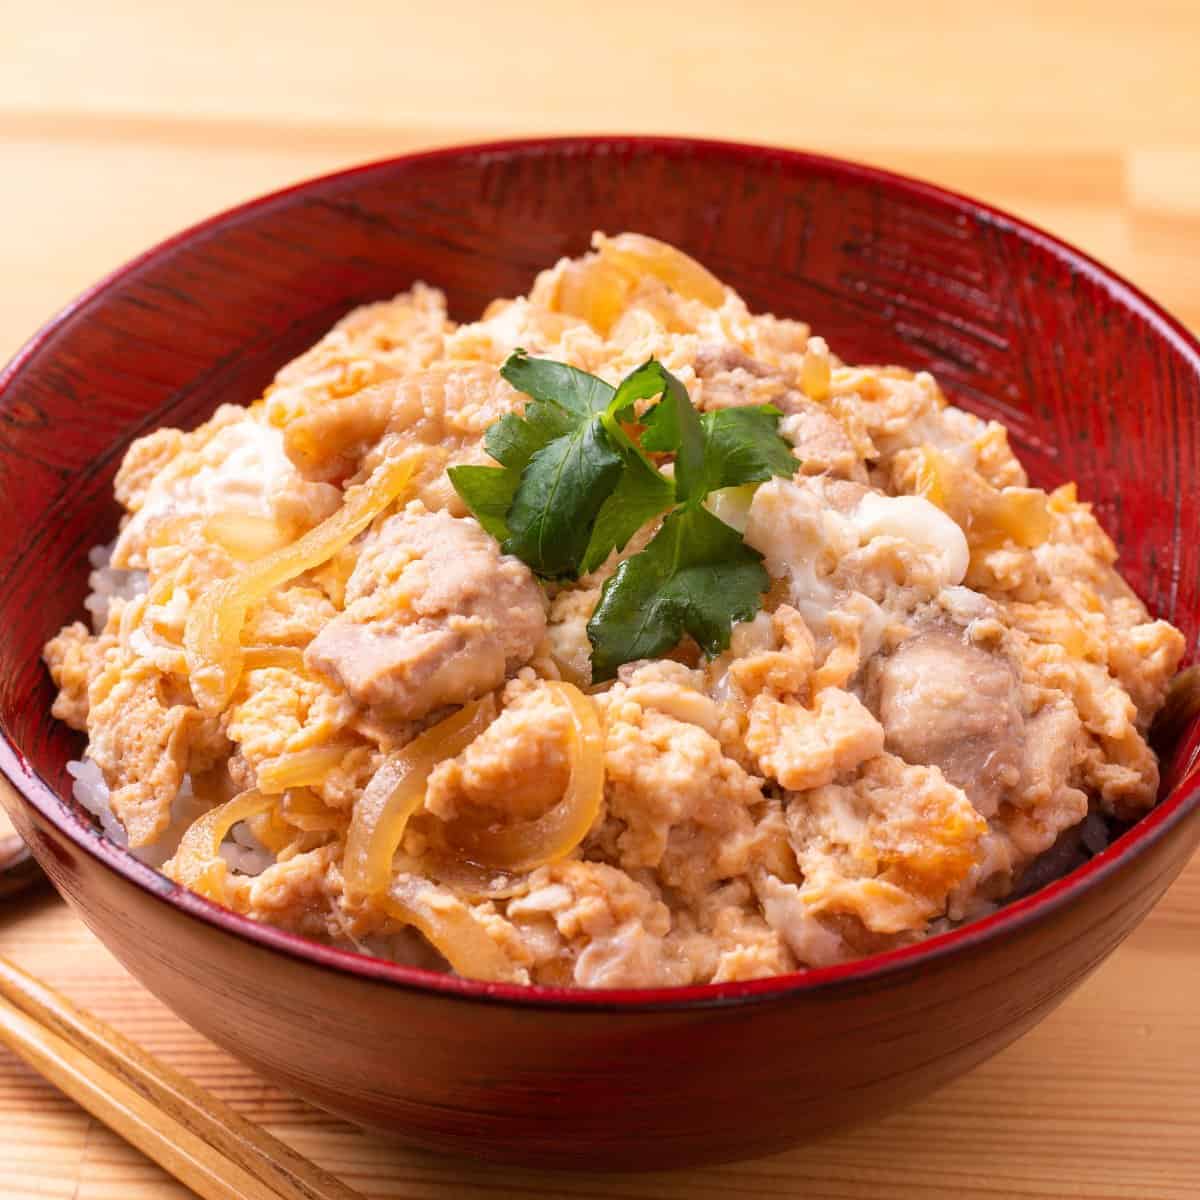 What is oyakodon